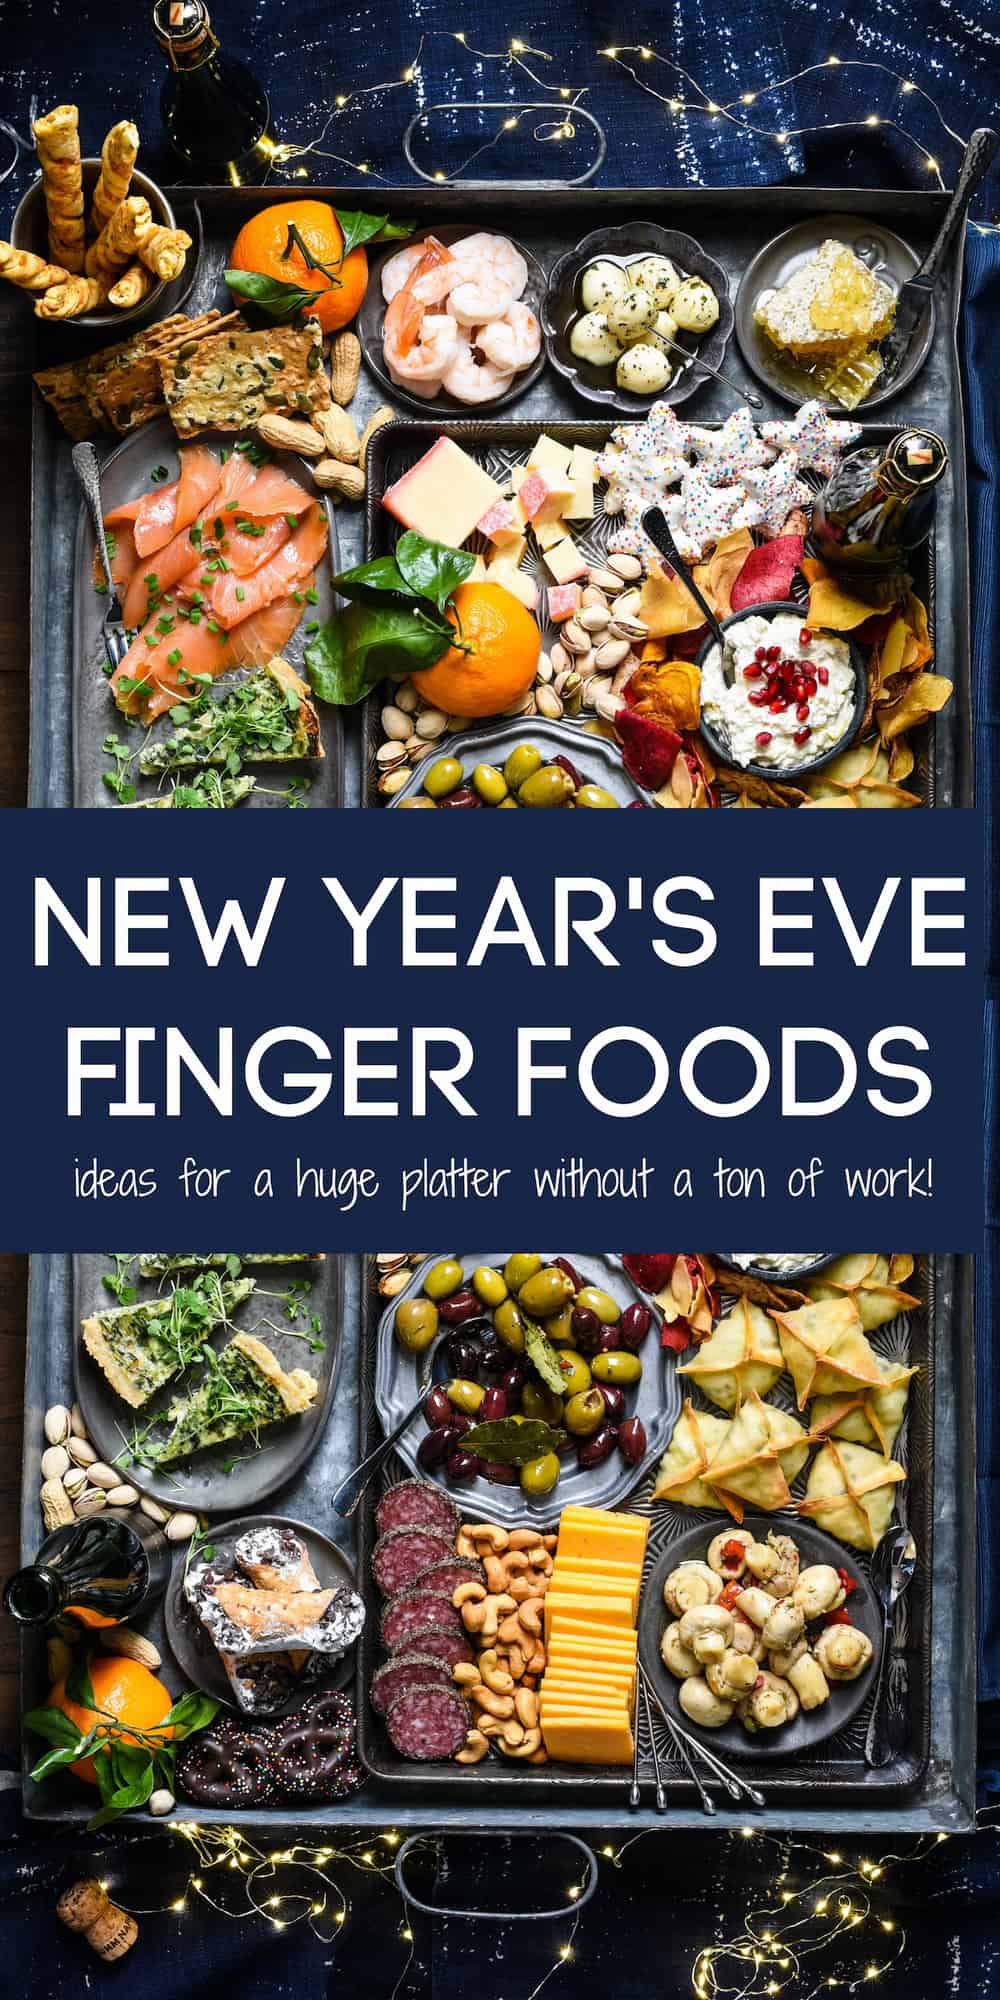 Collage of images of snack platter with overlay: NEW YEAR'S EVE FINGER FOODS ideas for a huge platter without a ton of work!